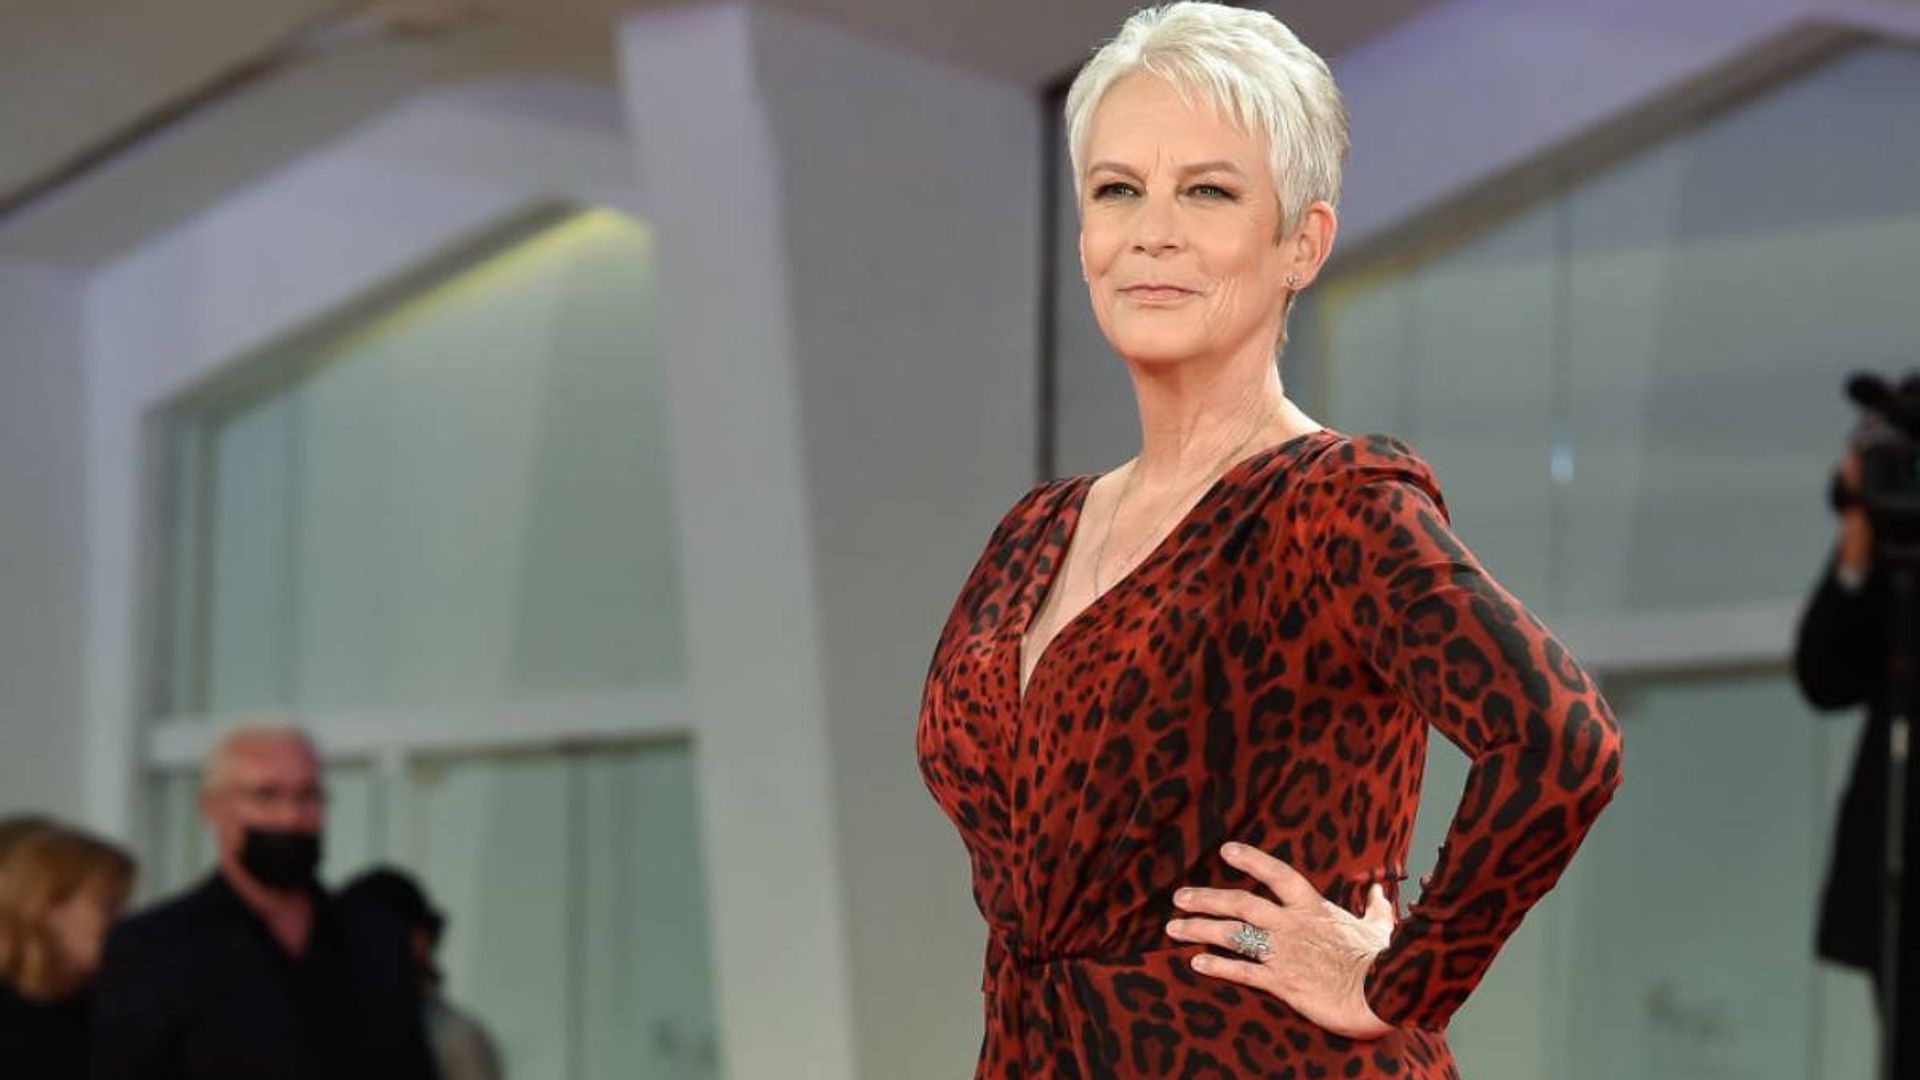 jamie lee curtis physique appearance